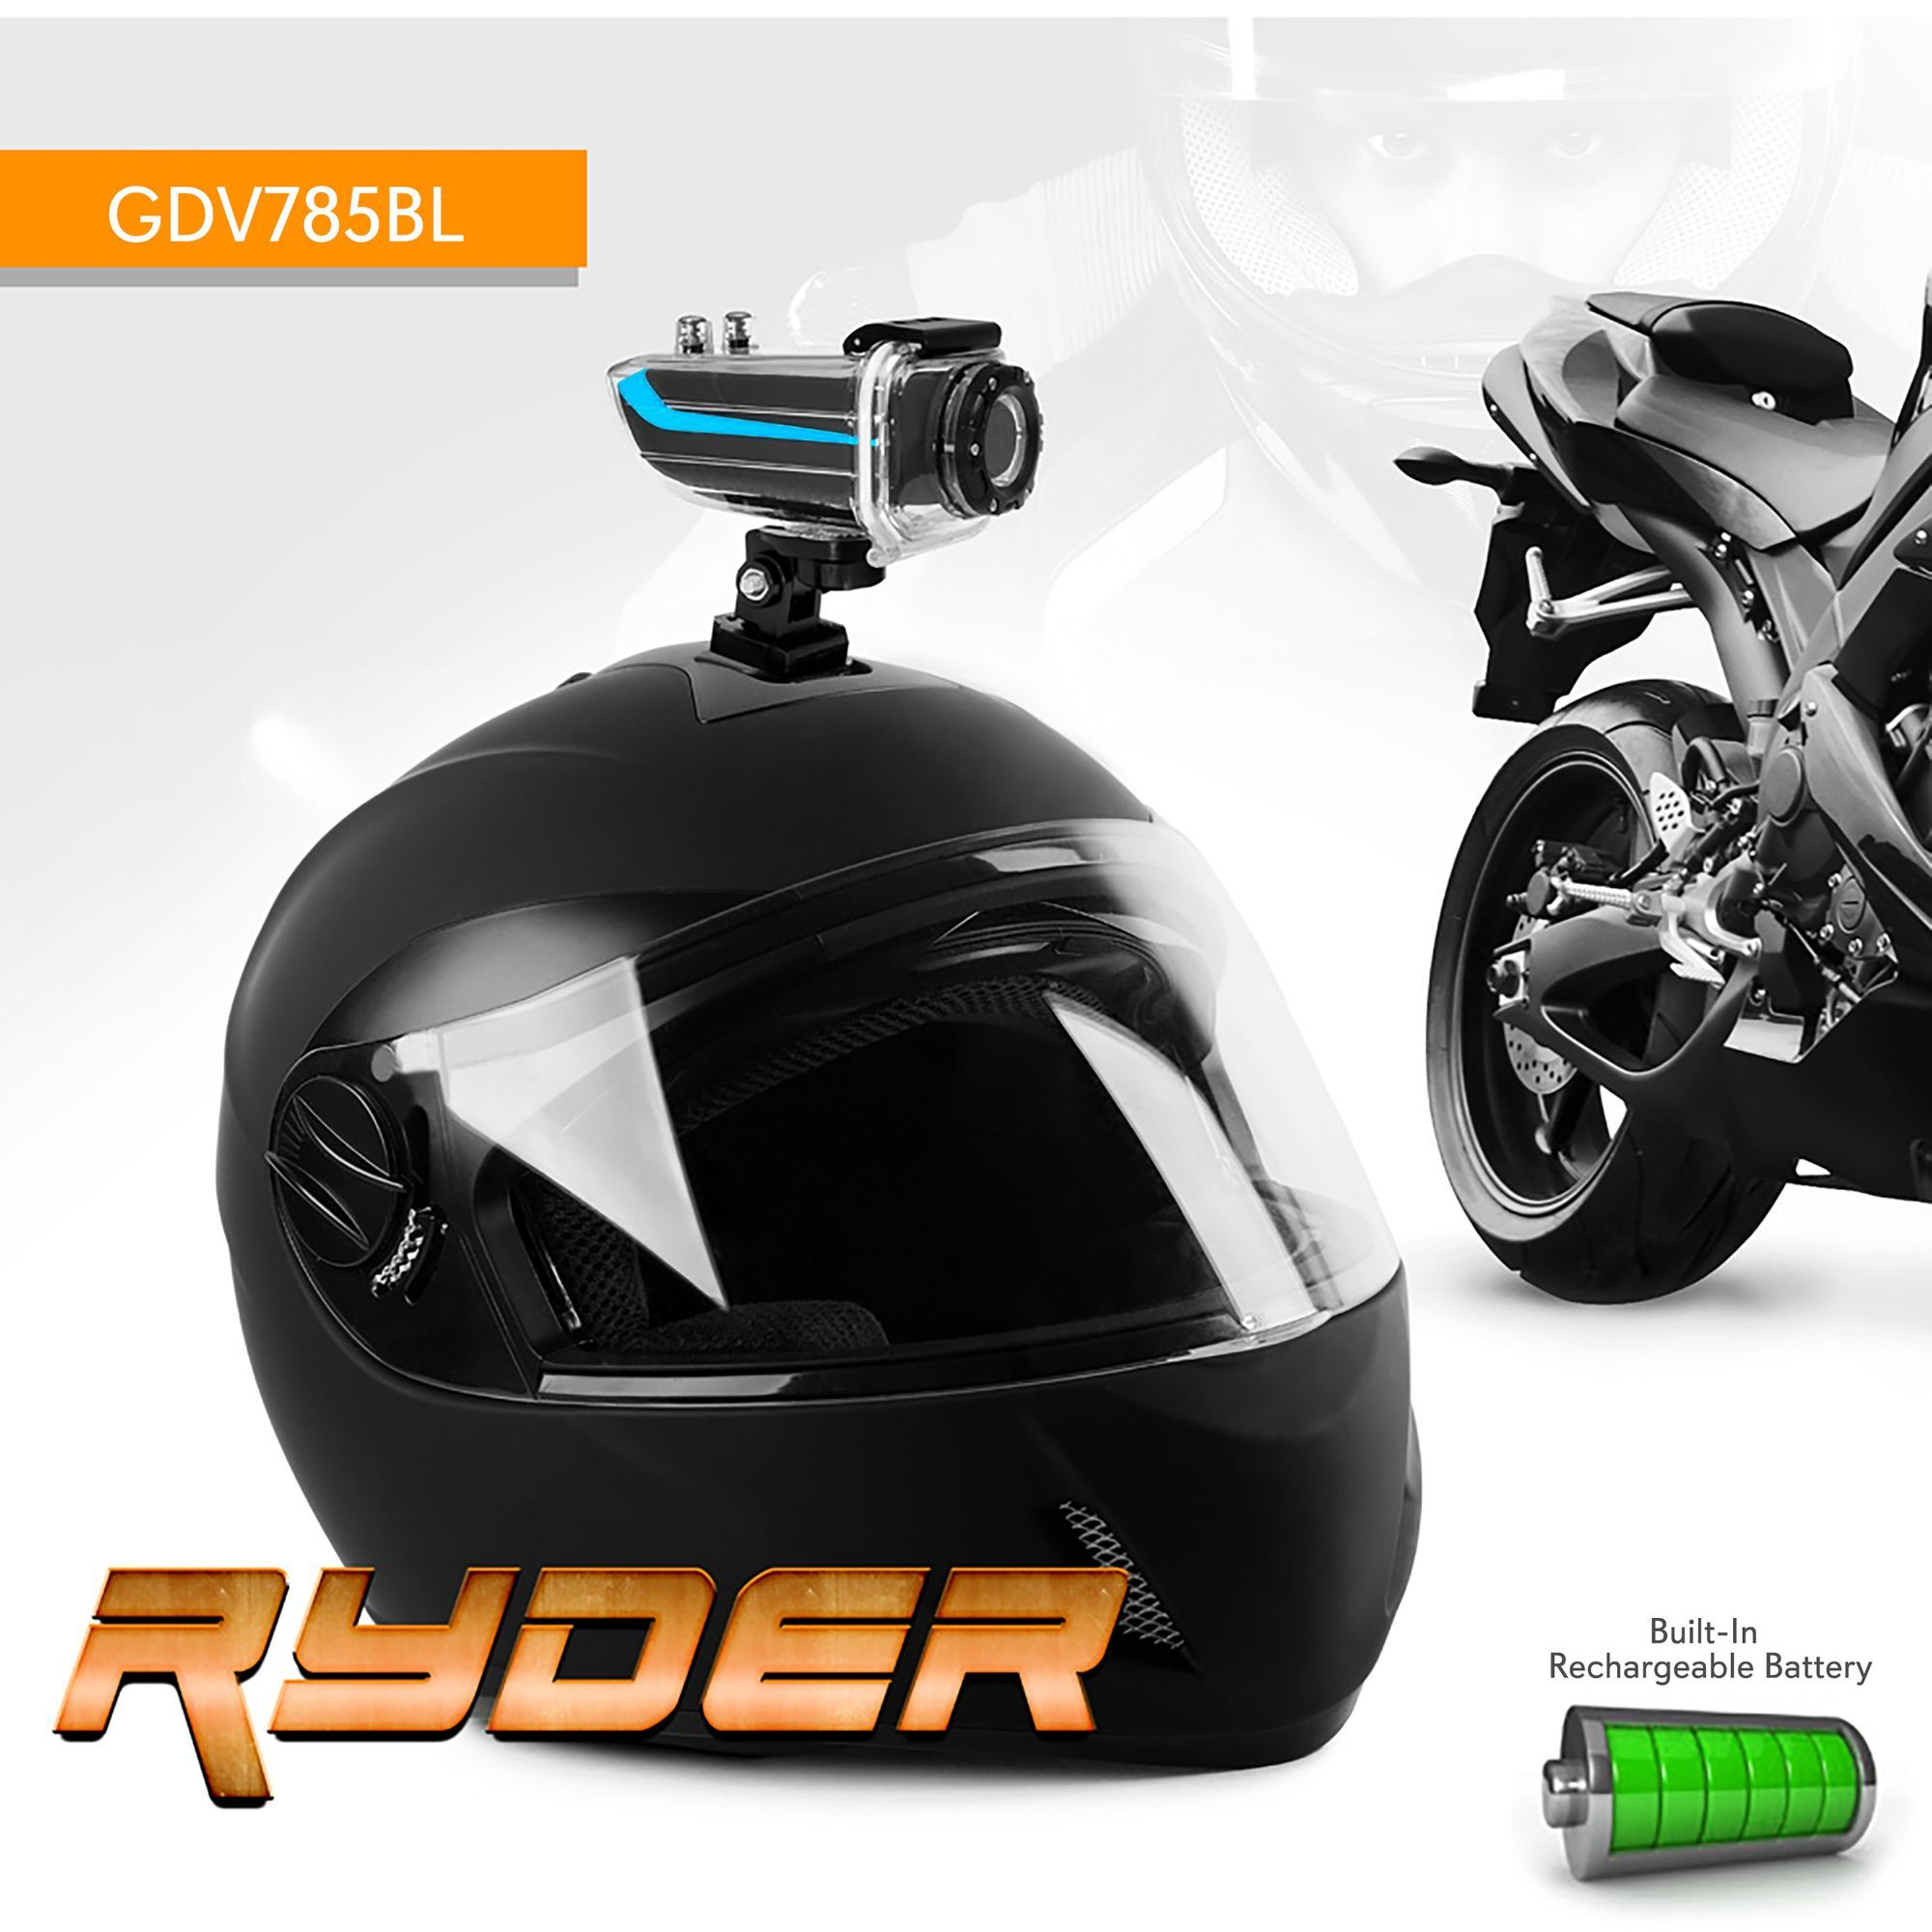 Pyle-Pro Sound Around GDV785BL HD Video Recording Gear Pro Ryder Action Camera, Hi-Resolution Fully HD, 16 Megapixel Images, 1080p Video, Fold-Out 1.5-Inch LCD Display